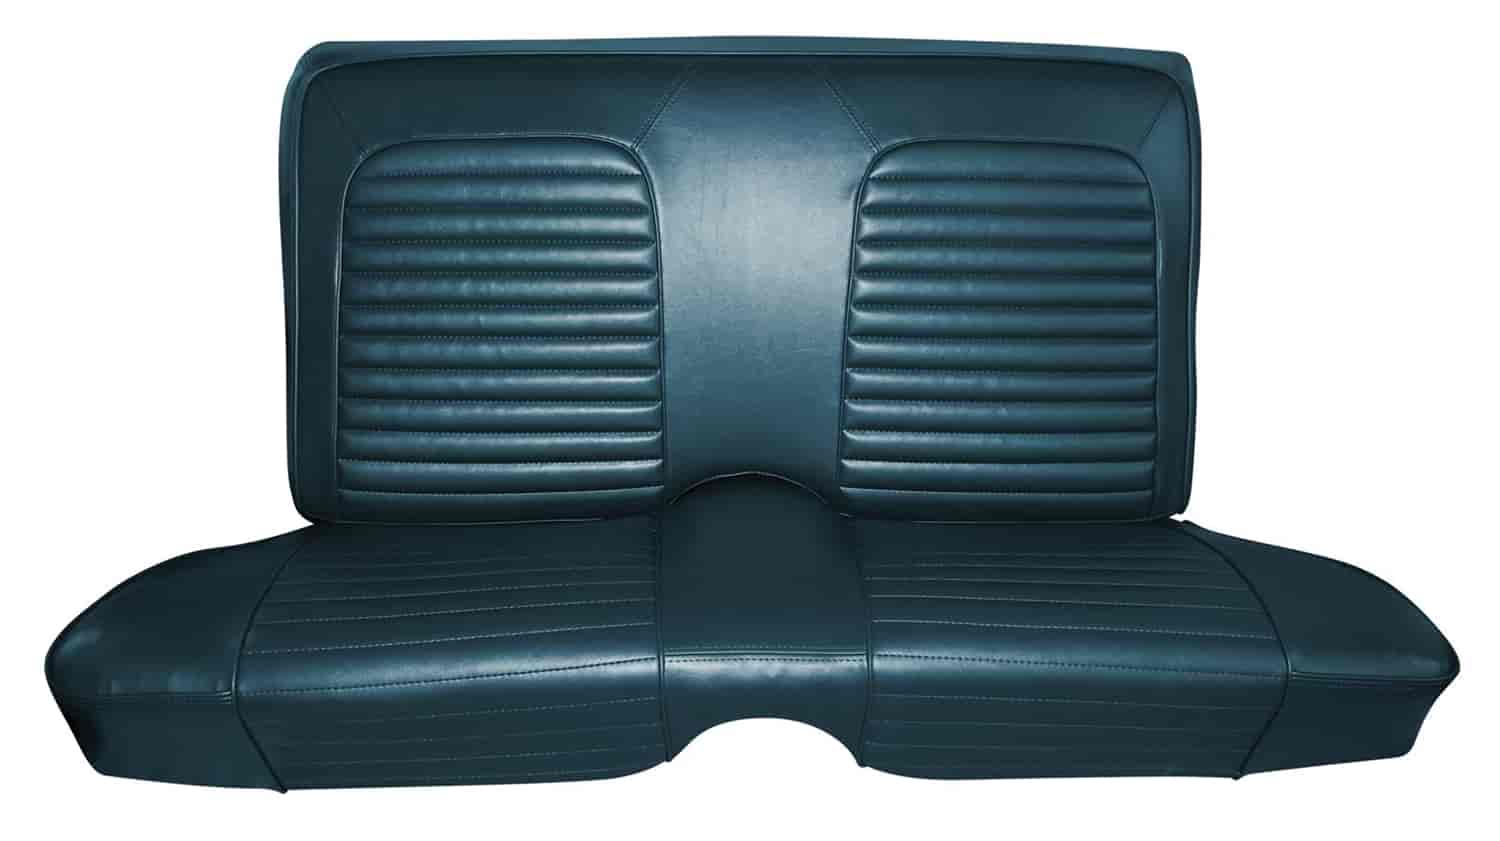 1963 Ford Falcon Futura, Sport Convertible Interior Rear Bench Seat Upholstery for Models with Front Bucket Seats Upholstery Set